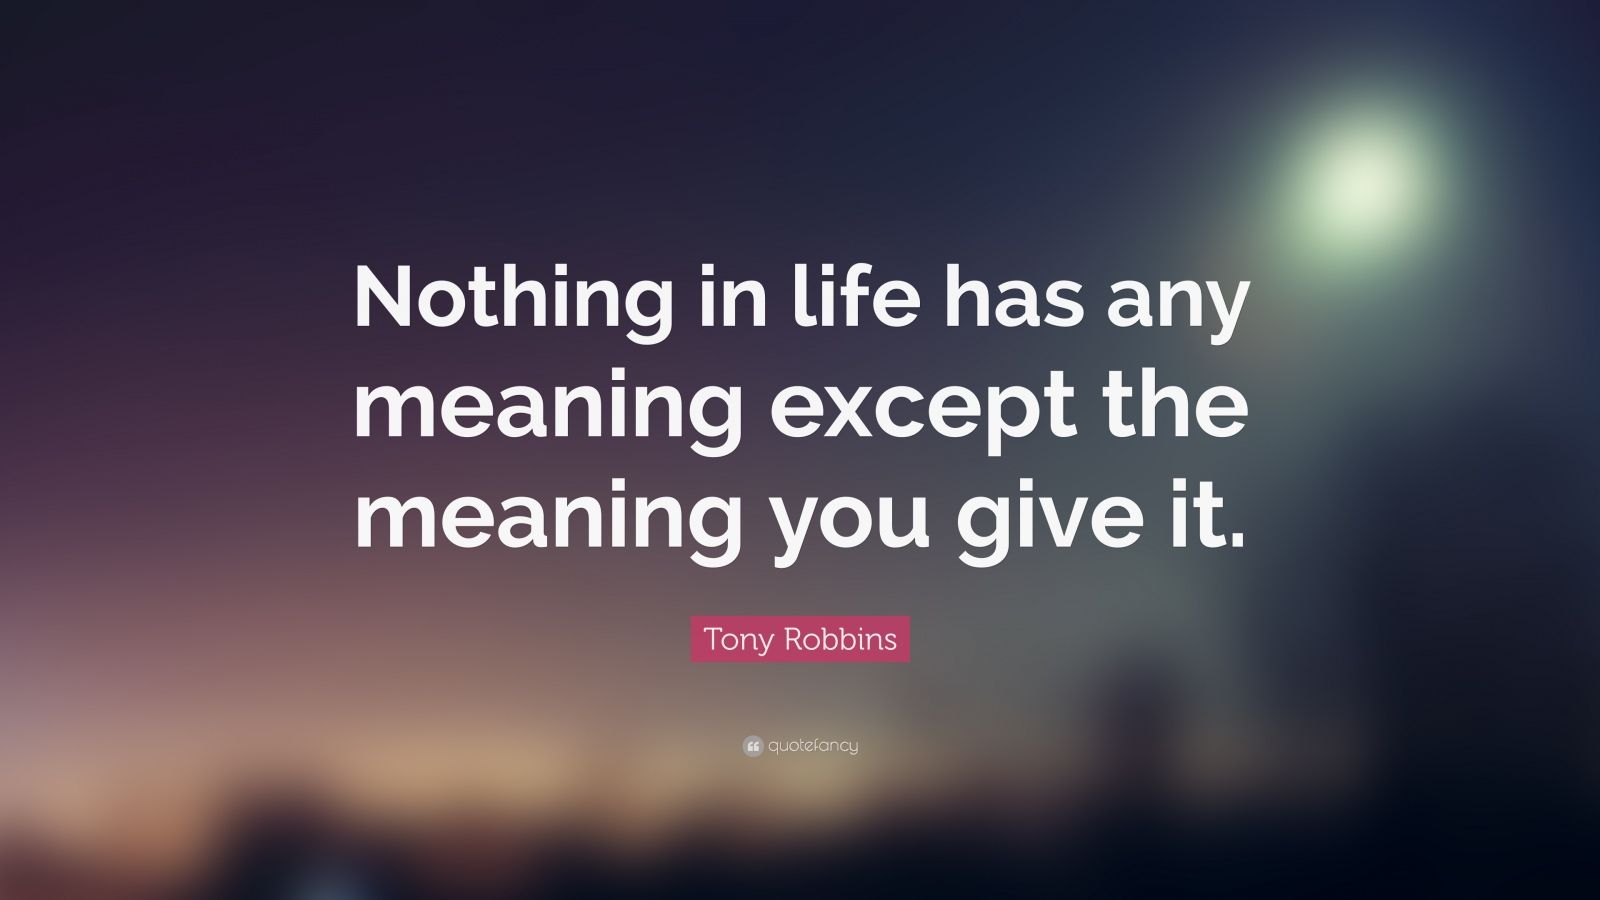 Tony Robbins Quote: “Nothing in life has any meaning except the meaning